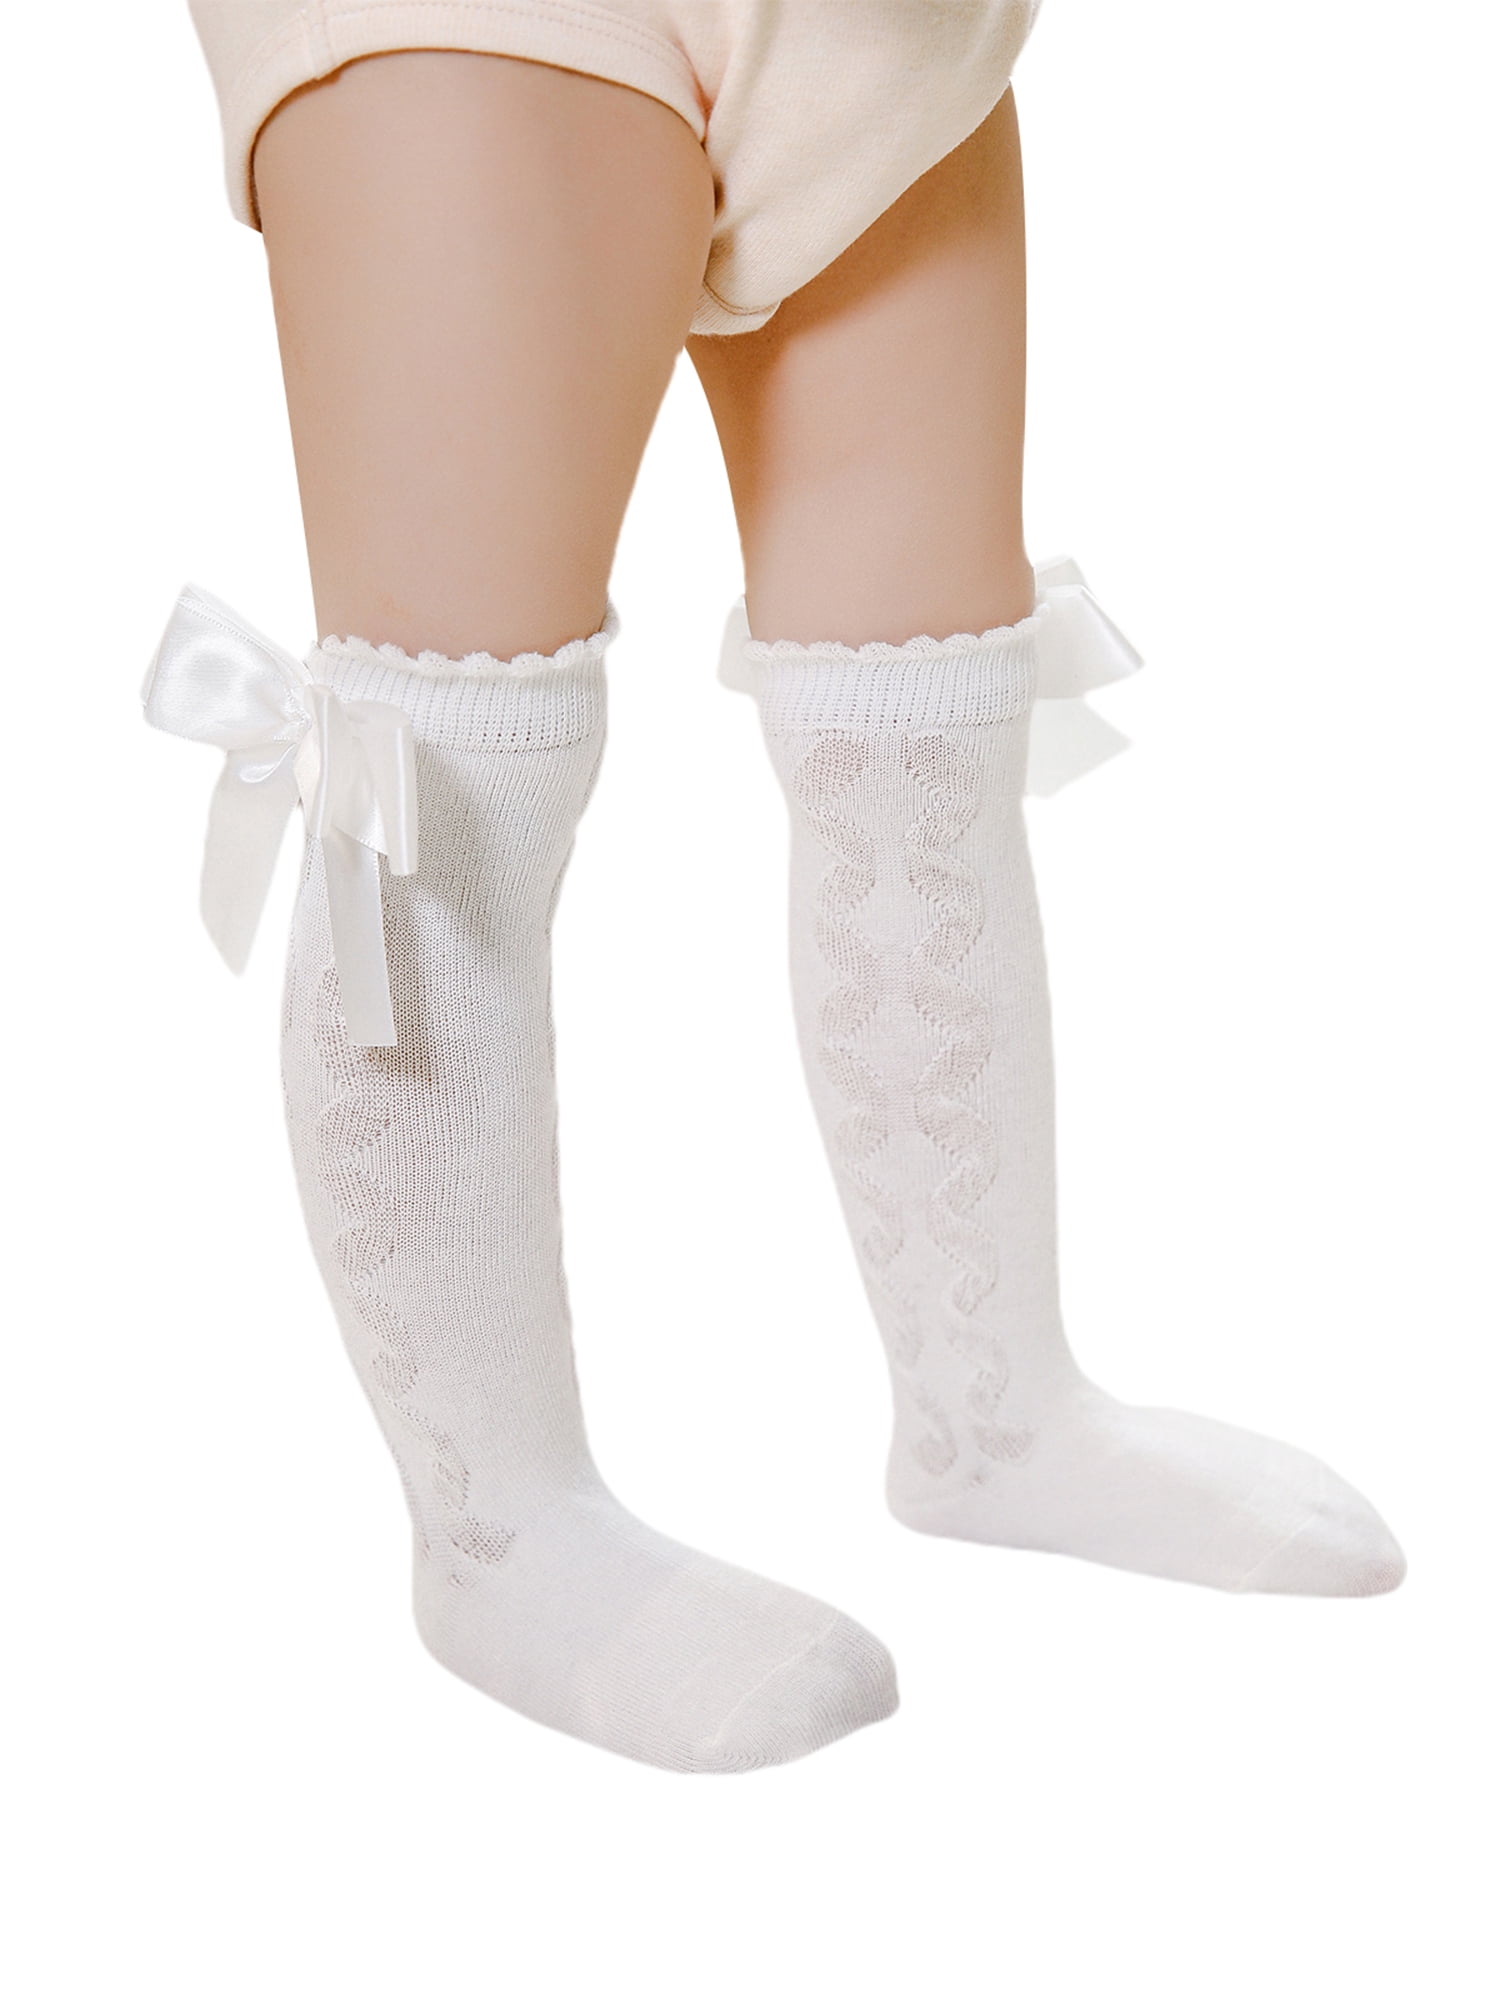 Baby Girls Uniform Knee High Socks Bowknot Tube Stockings Infants Toddlers Party School Cotton Long Stockings White 